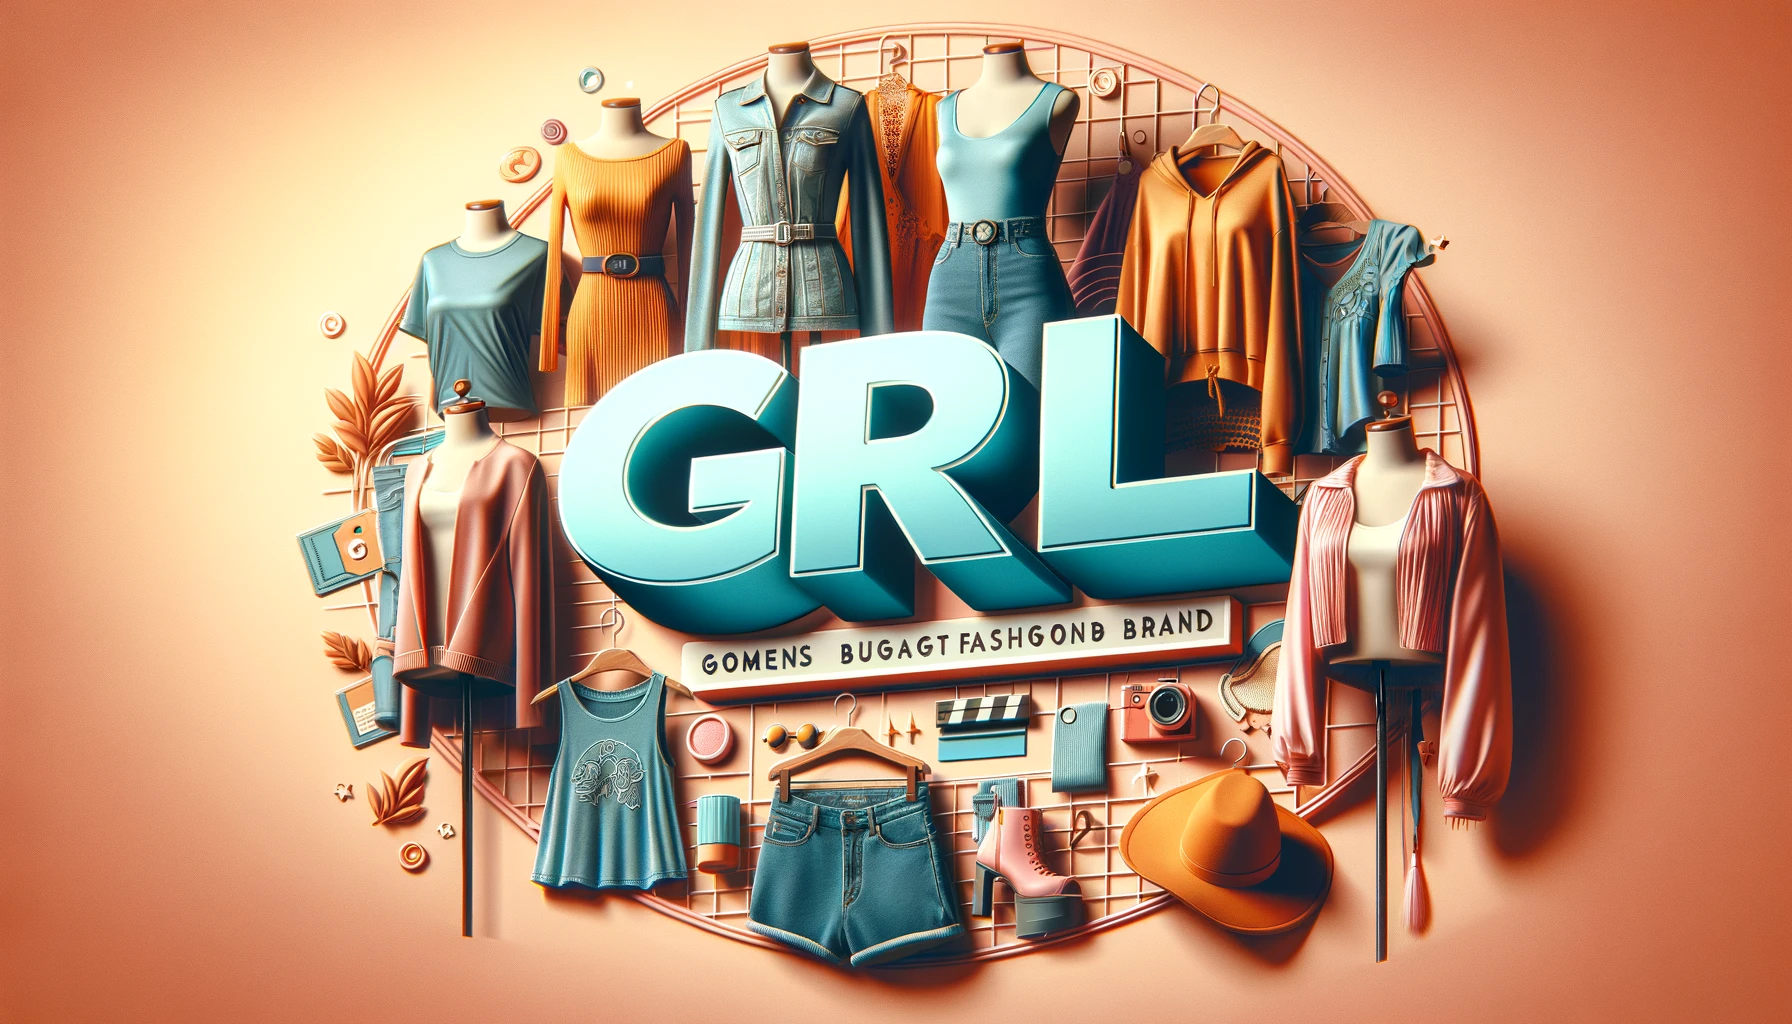 A stylish layout for a women's budget fashion brand named 'GRL' with a focus on product quality. The image features trendy and affordable clothing items displayed attractively, with visual elements representing high-quality materials and craftsmanship. Incorporate the word 'GRL' prominently in the design. The background should be vibrant and fashionable, reflecting the brand's appeal to young women. The image should be in a 16:9 aspect ratio.